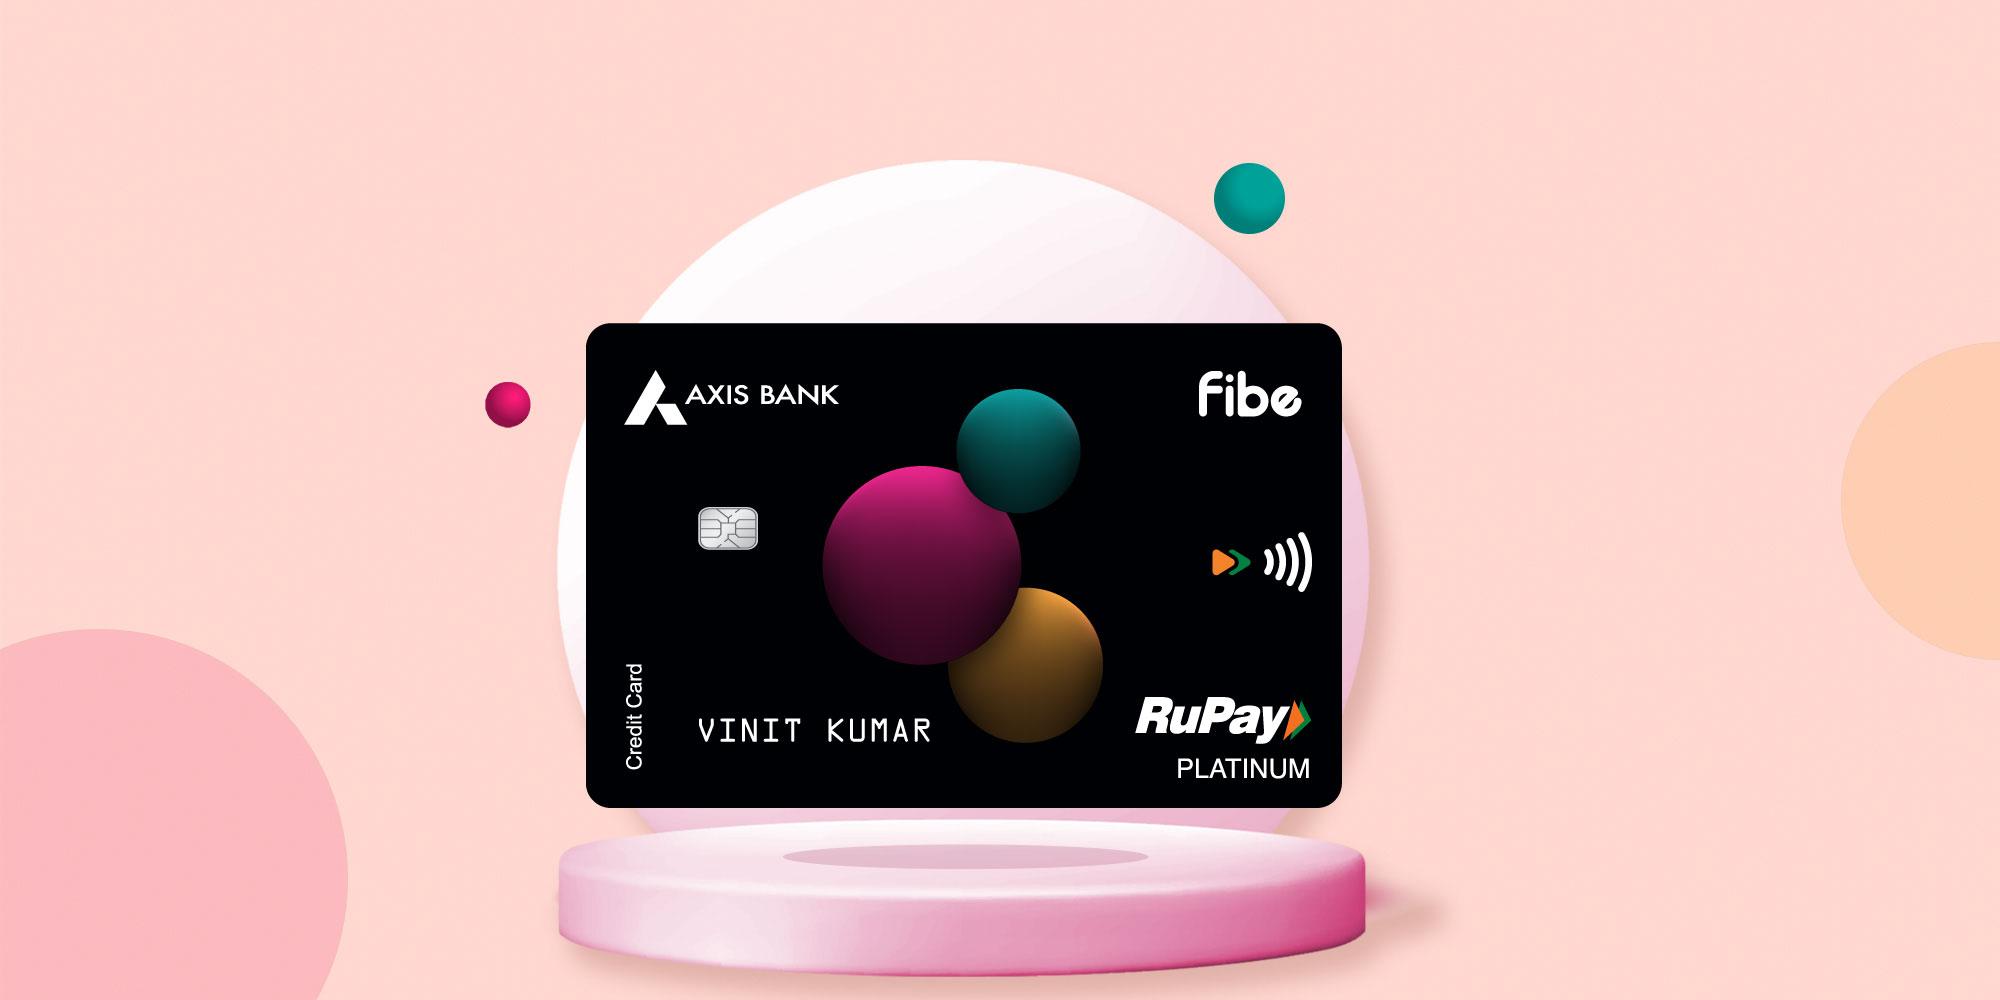 A comprehensive guide on the new Fibe Axis Bank Credit Card on UPI apps